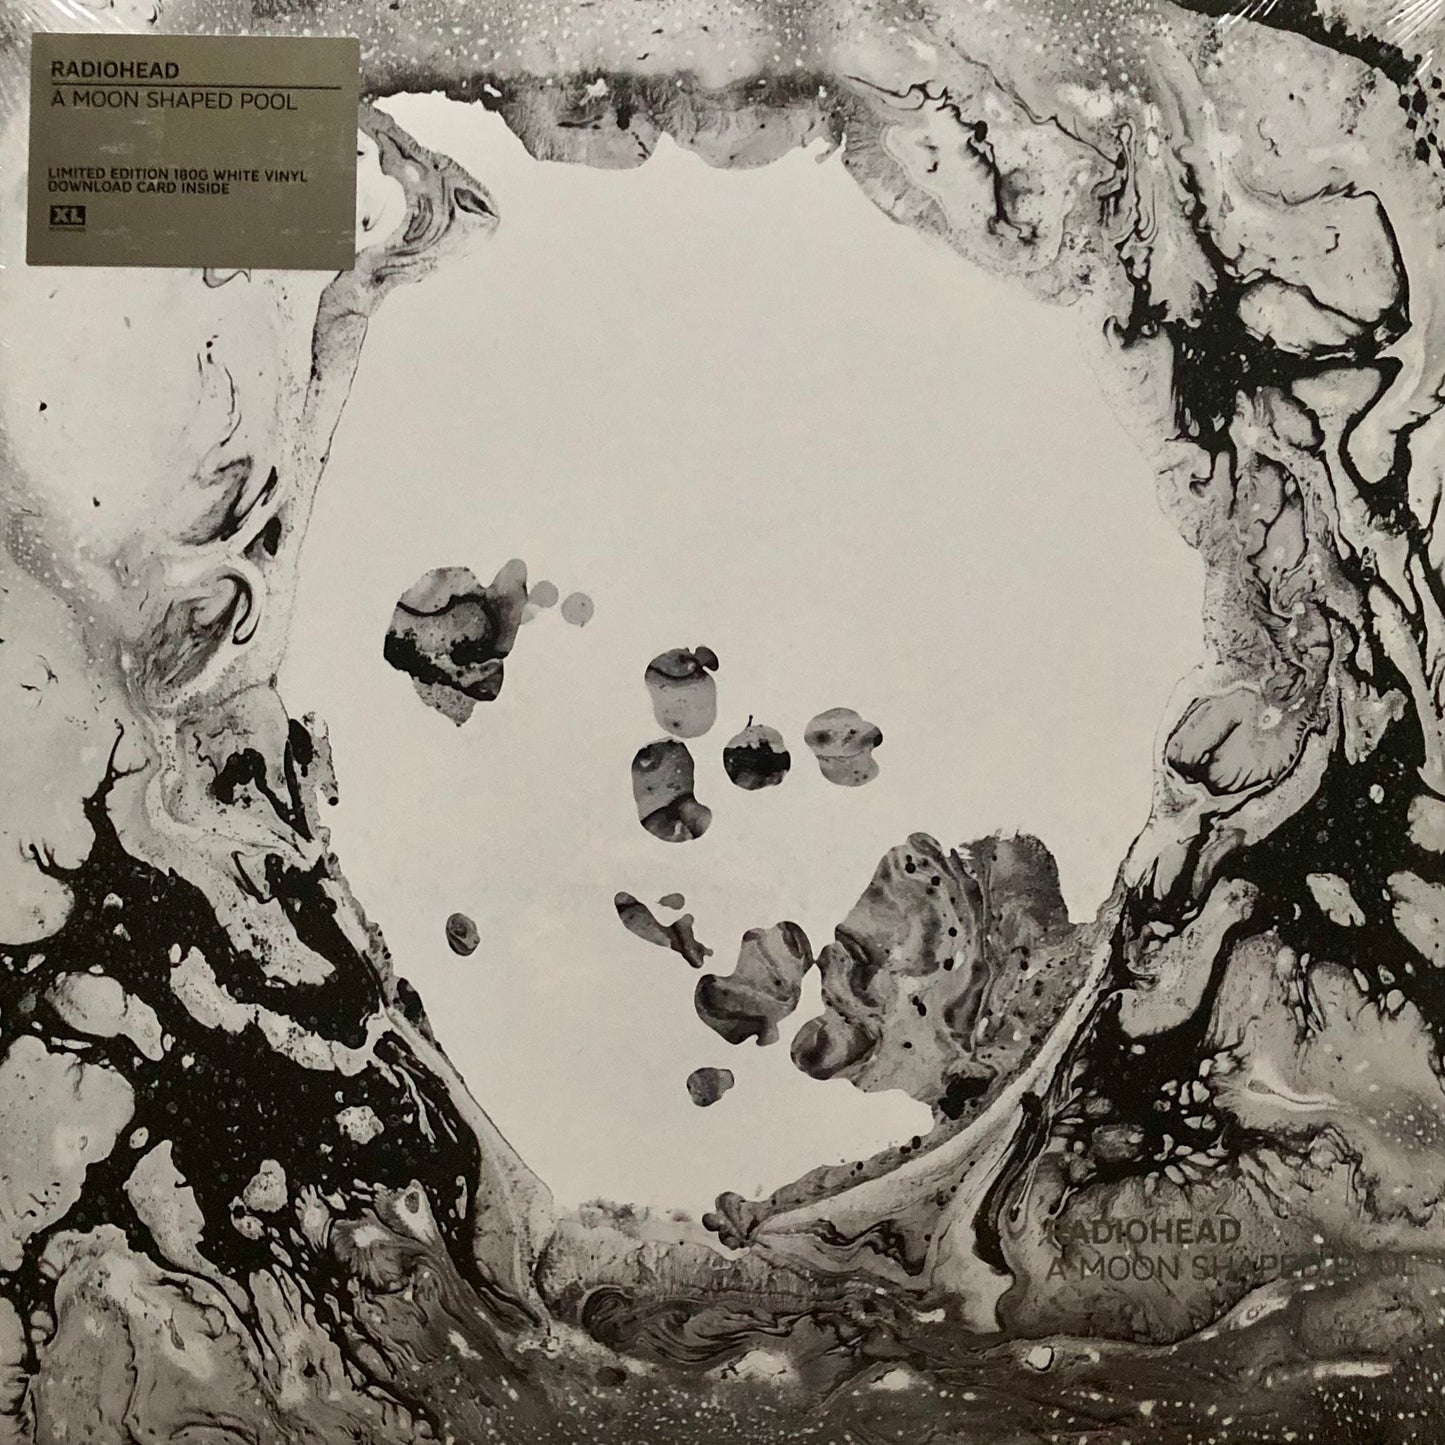 A Moon Shaped Pool (Limited Edition LRS 2020 Exclusive 180g 2XLP White Vinyl)